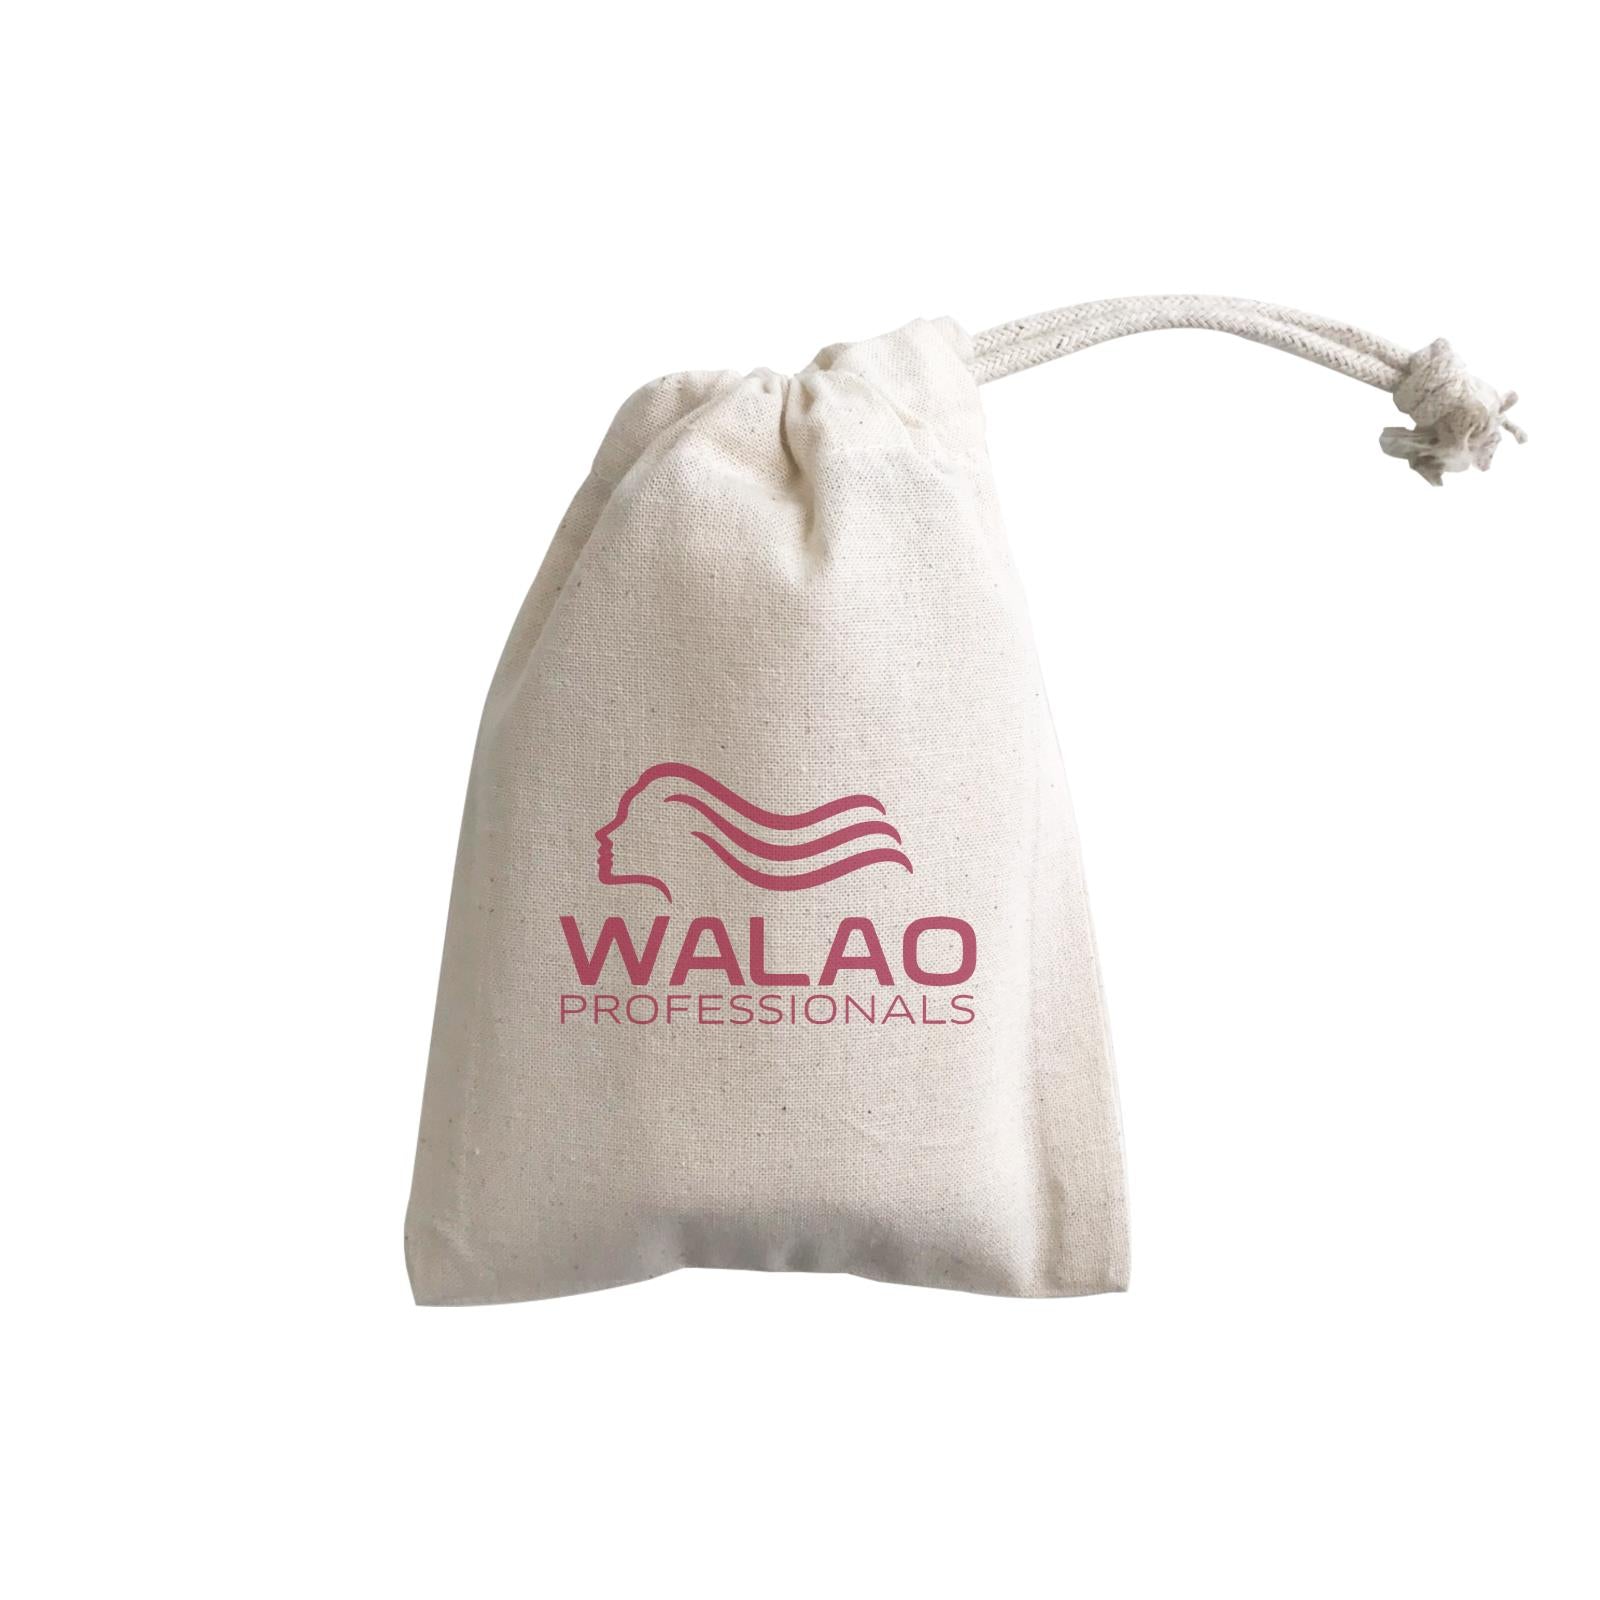 Slang Statement Walao Professional GP Gift Pouch